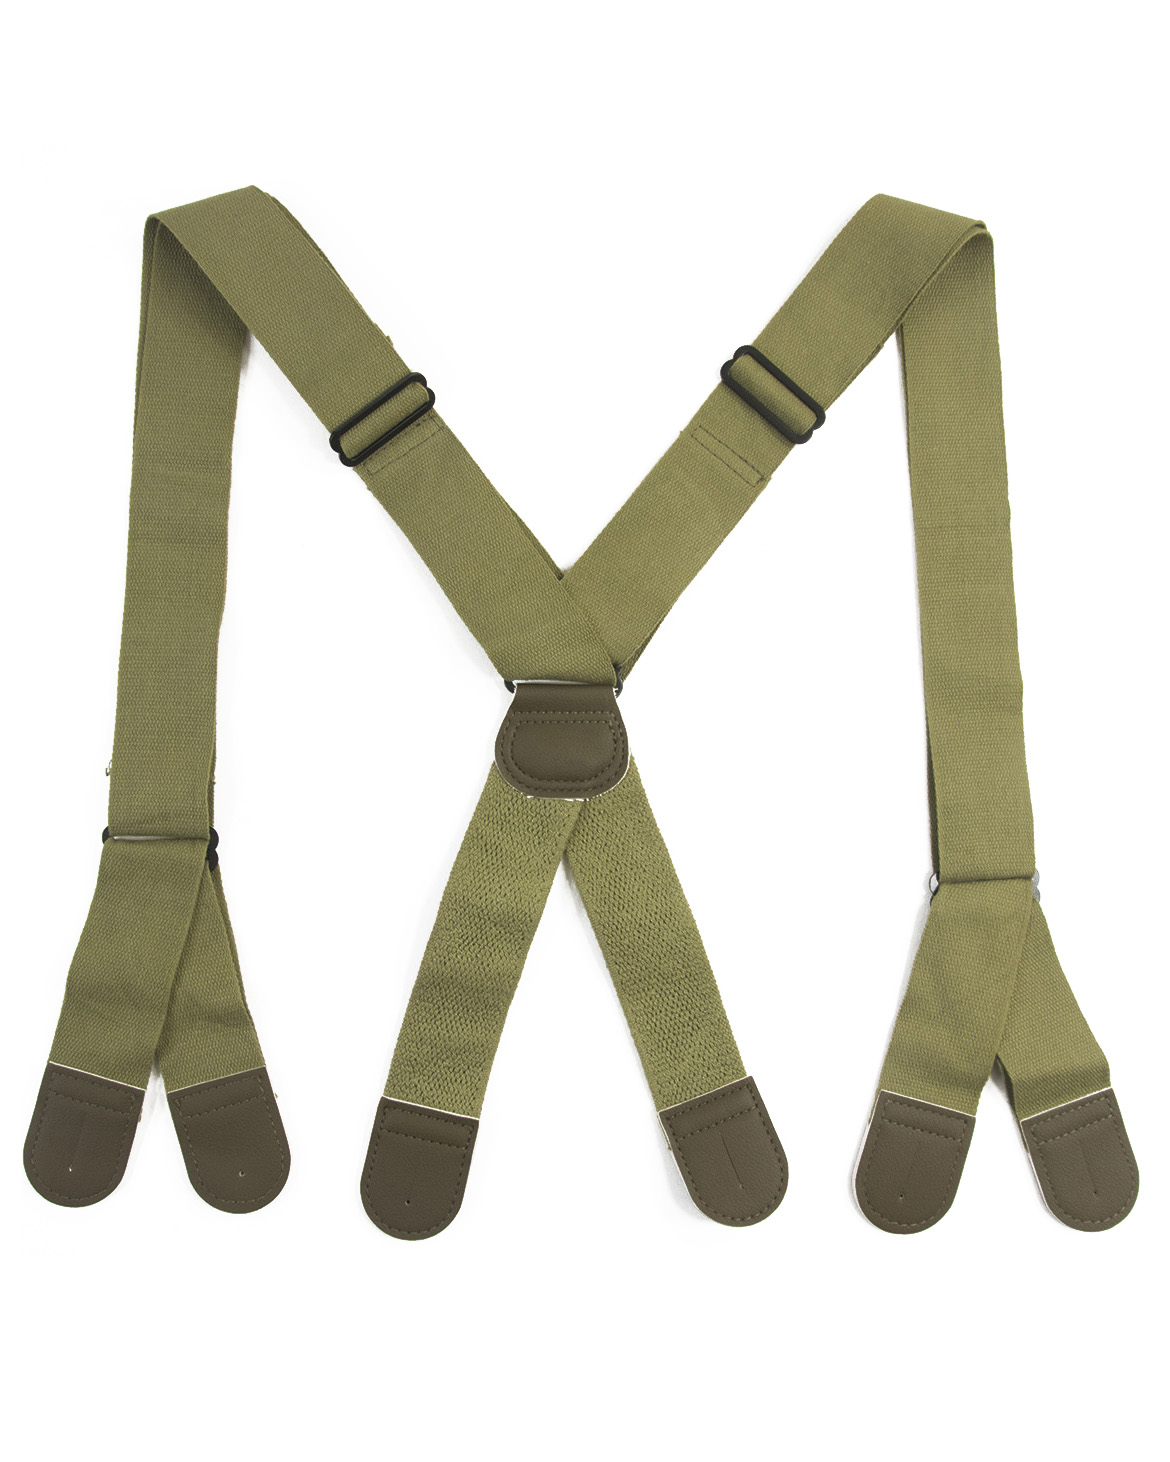 CANADIAN / BRITISH WW2 ARMY TROUSER SUSPENDERS